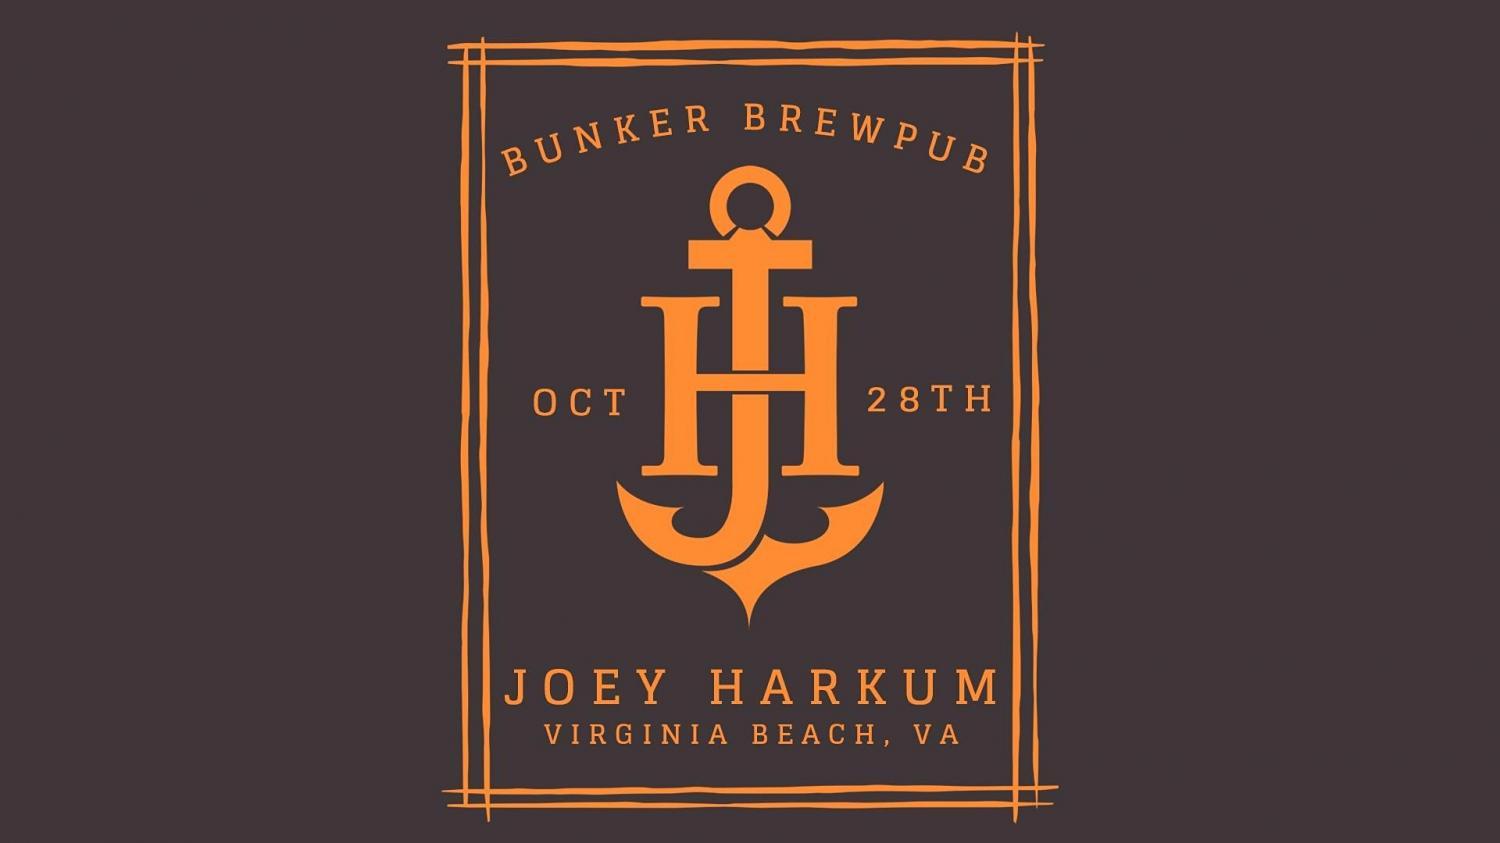 Joey Harkum Band with Special Guests at The Bunker Brewpub
Fri Oct 28, 7:00 PM - Fri Oct 28, 11:00 PM
in 9 days